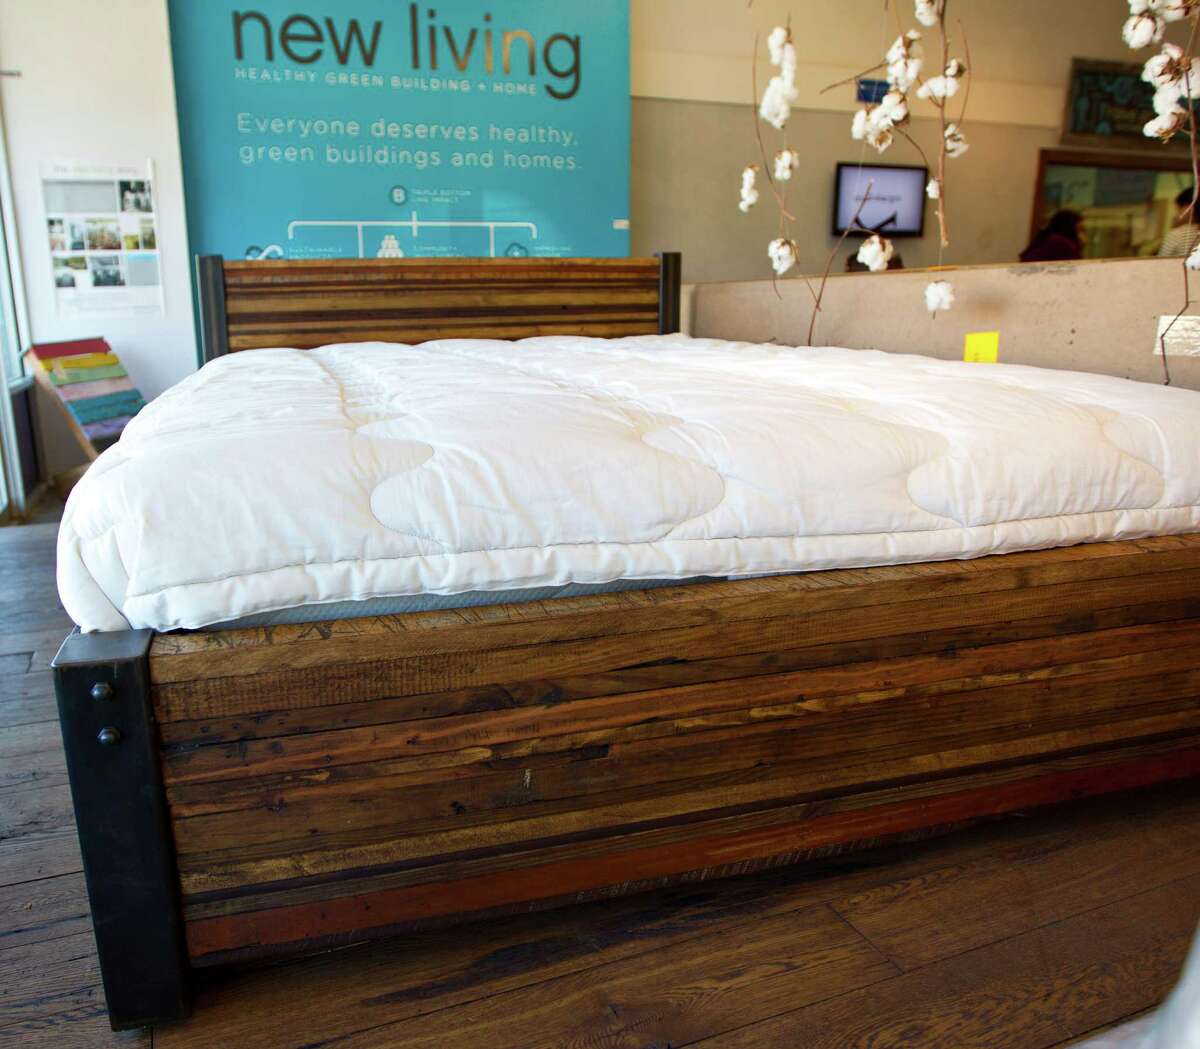 One of the finished furniture pieces made in the workshop in Made @ New Living, a custom furniture store inside the larger New Living store on Kirby, Thursday, Jan. 17, 2013. ( Karen Warren / Houston Chronicle )